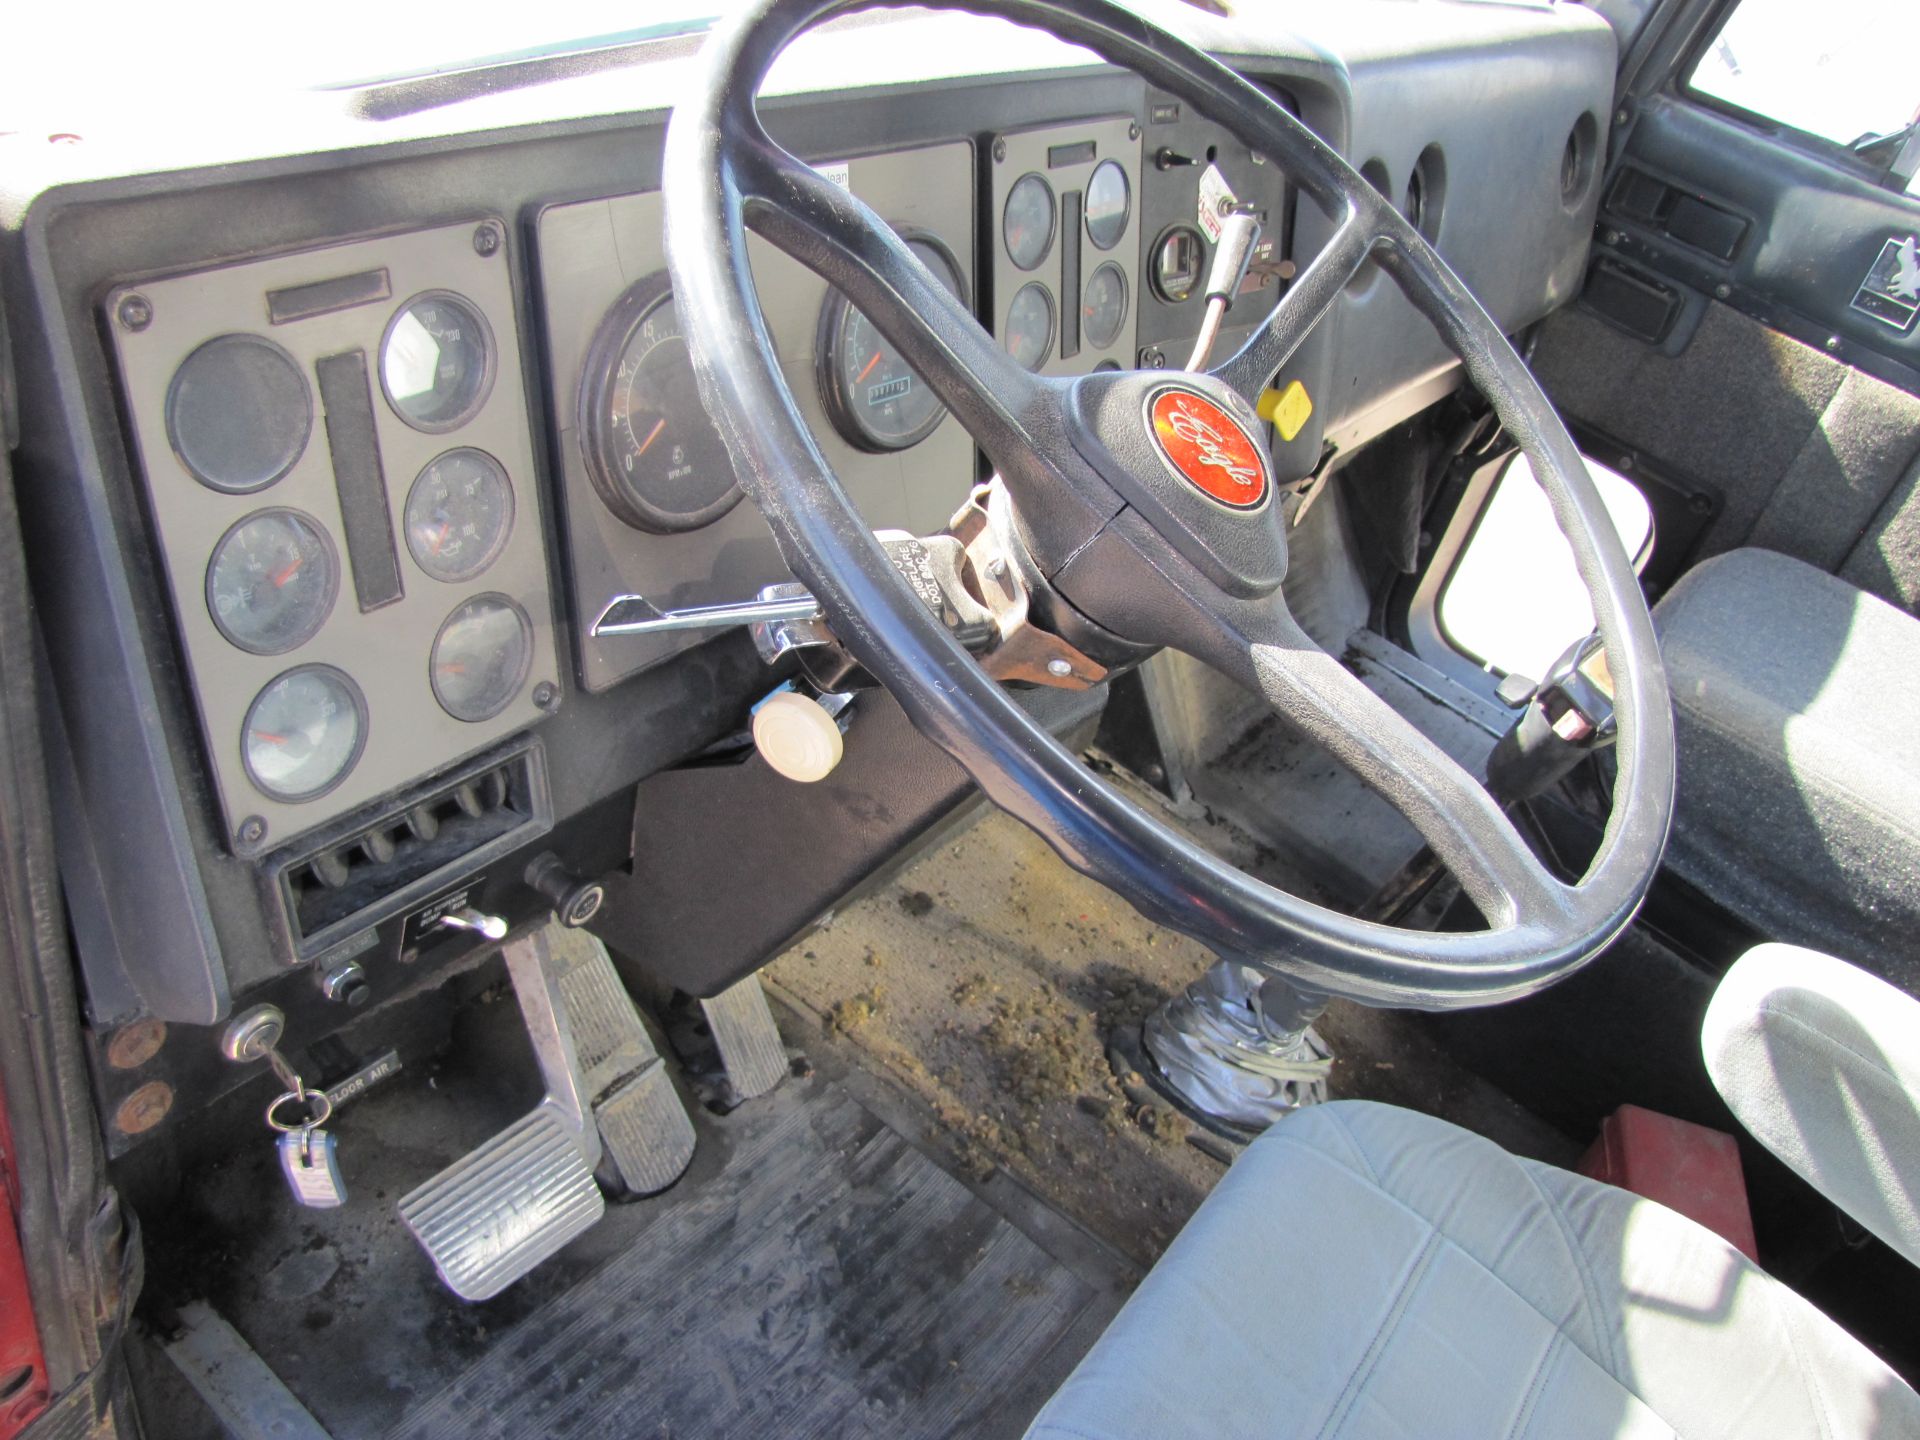 1988 International Eagle 9300, day cab, air ride, wet kit, Cat 3406P, Fuller 13-speed trans - Image 86 of 88